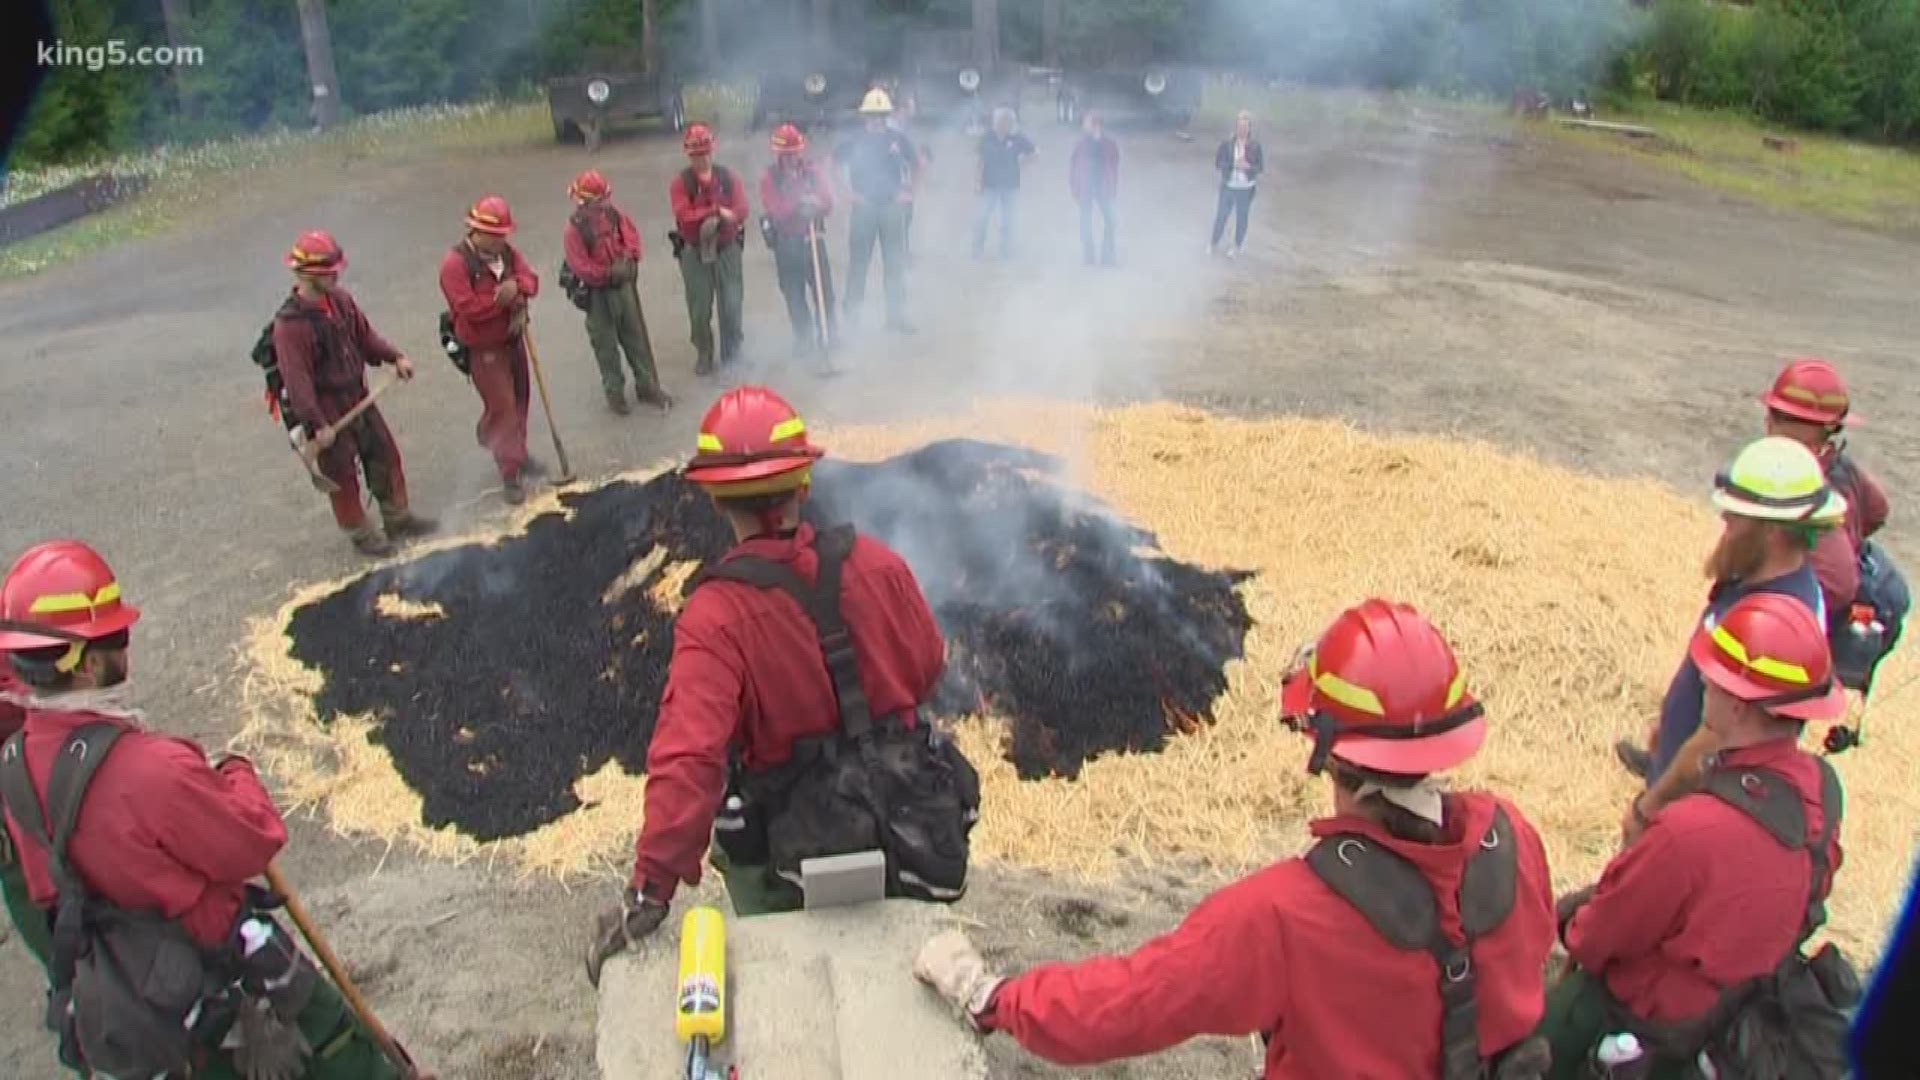 Despite a wet July, the state is preparing for a busy late summer, and perhaps early fall wildfire season. As a result, the state is training an additional 20 prison inmates to potentially respond to wildfires.